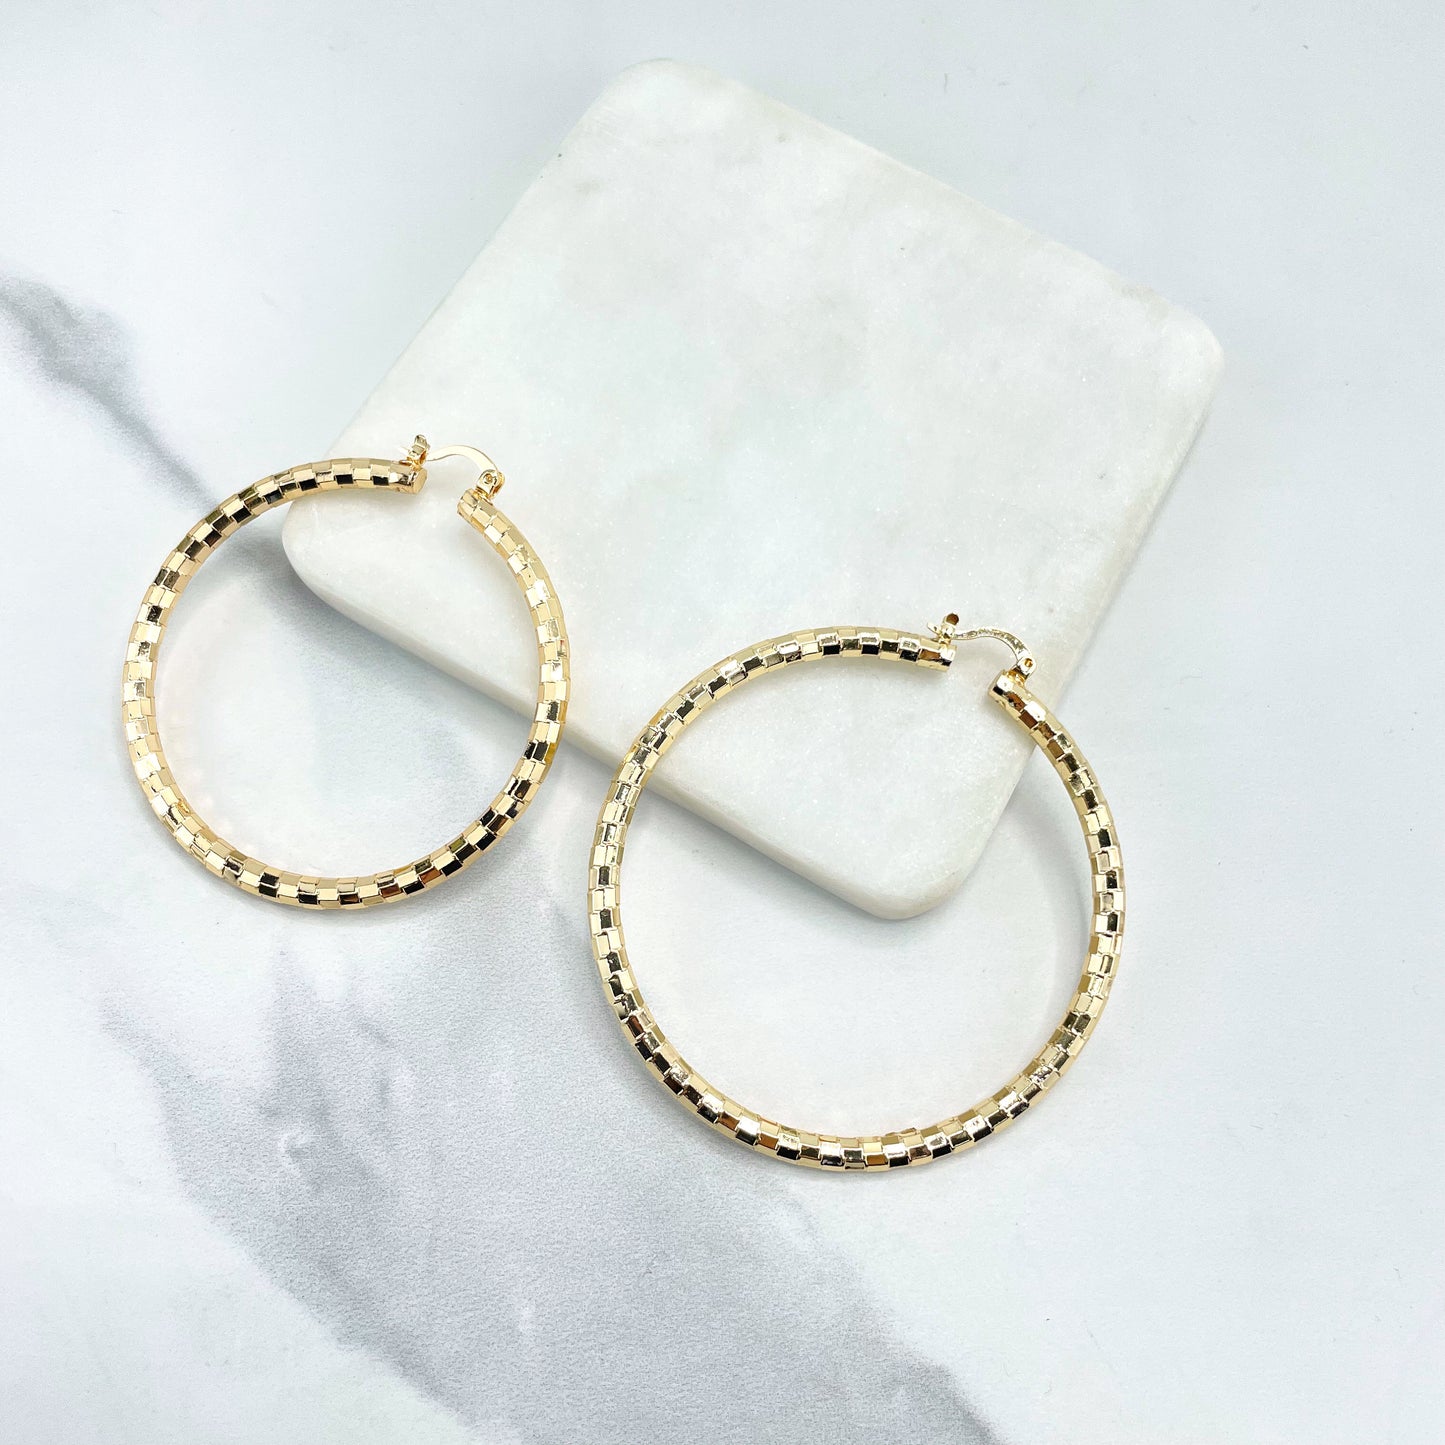 18k Gold Filled Texturized Squares Design Hoops Earrings, Large hoops 62mm or 72mm, Wholesale Jewelry Making Supplies